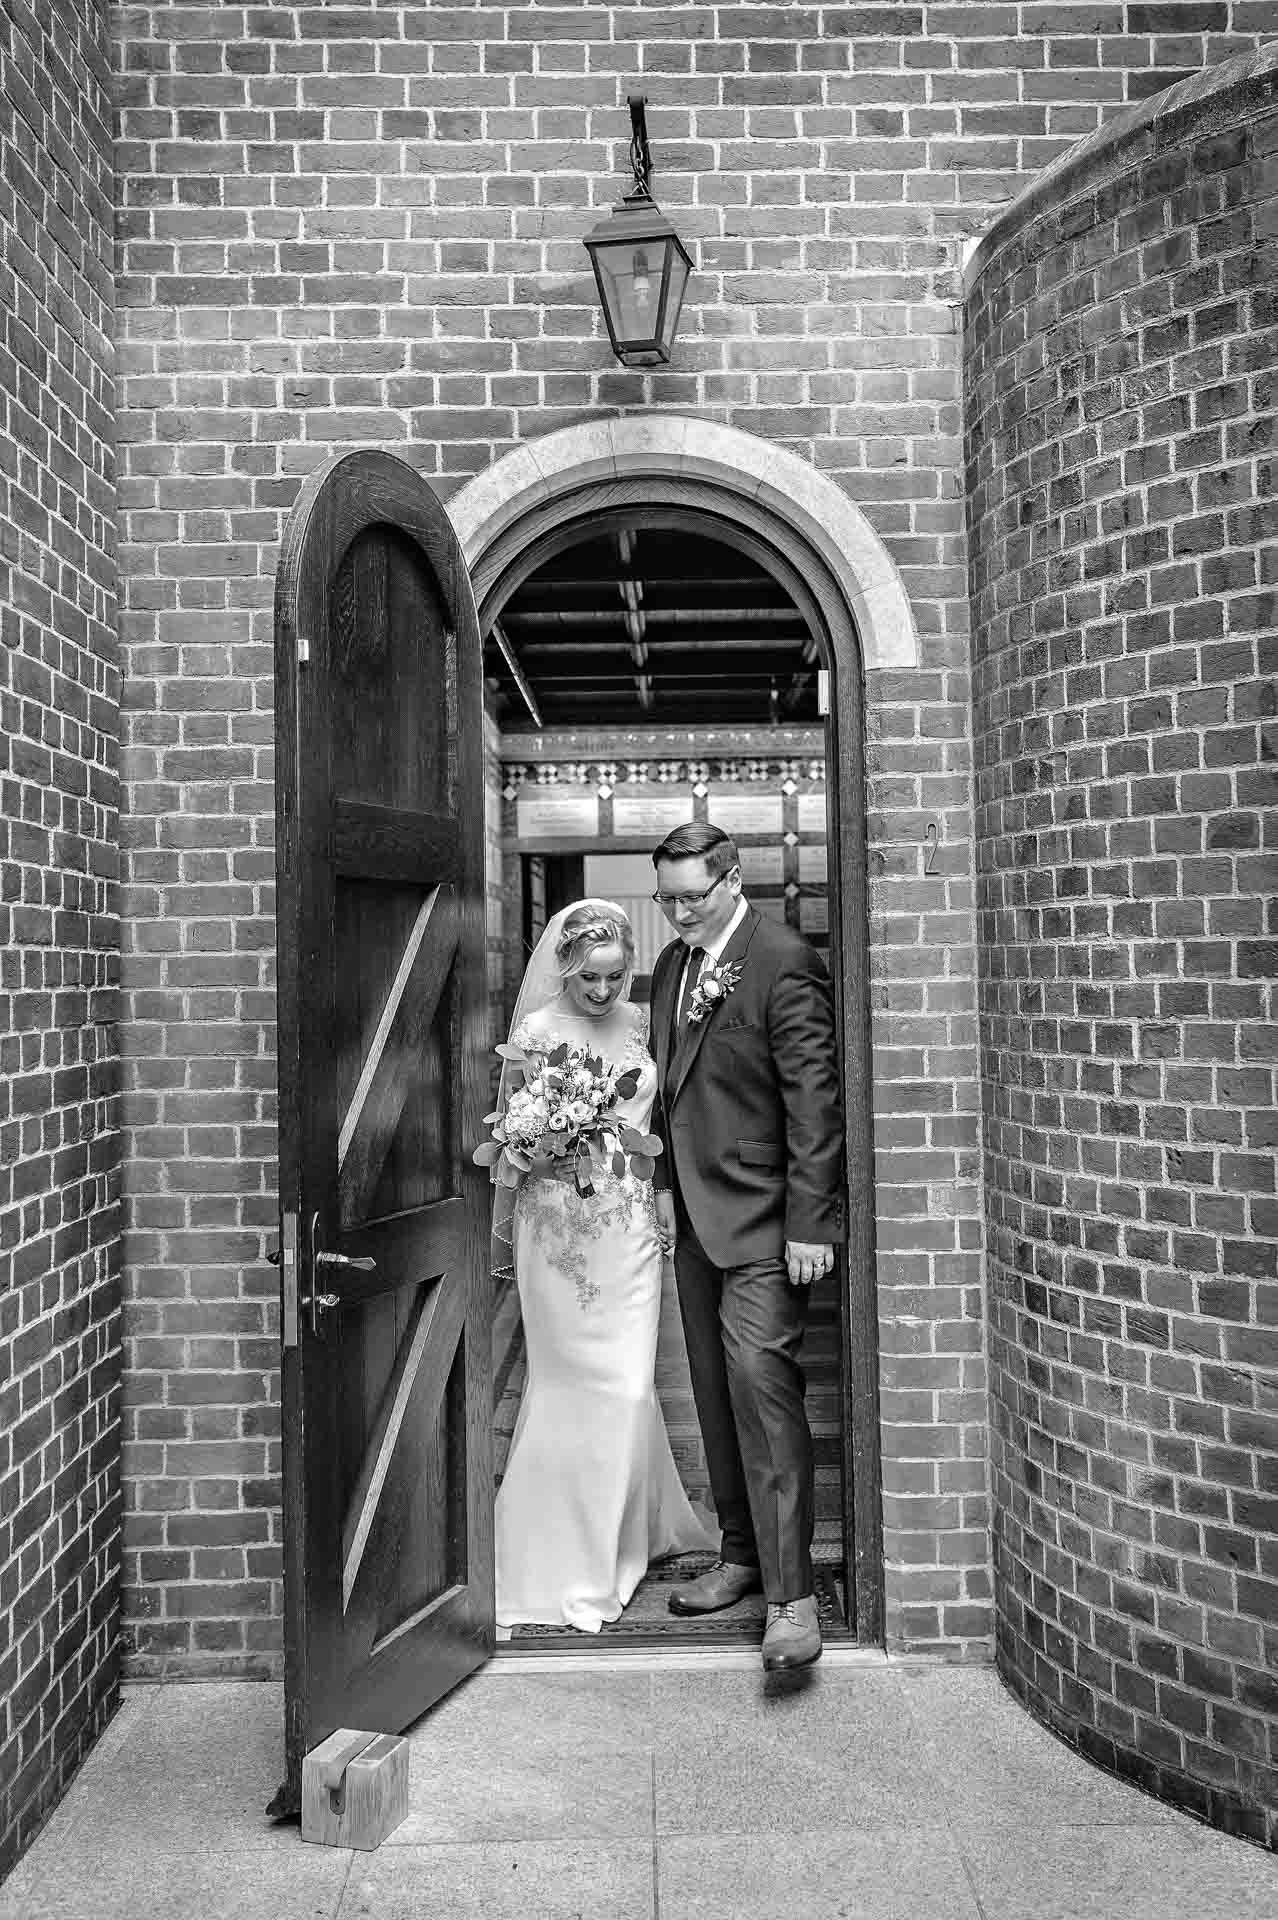 Newly-weds leaving chapel door after wedding in black and white